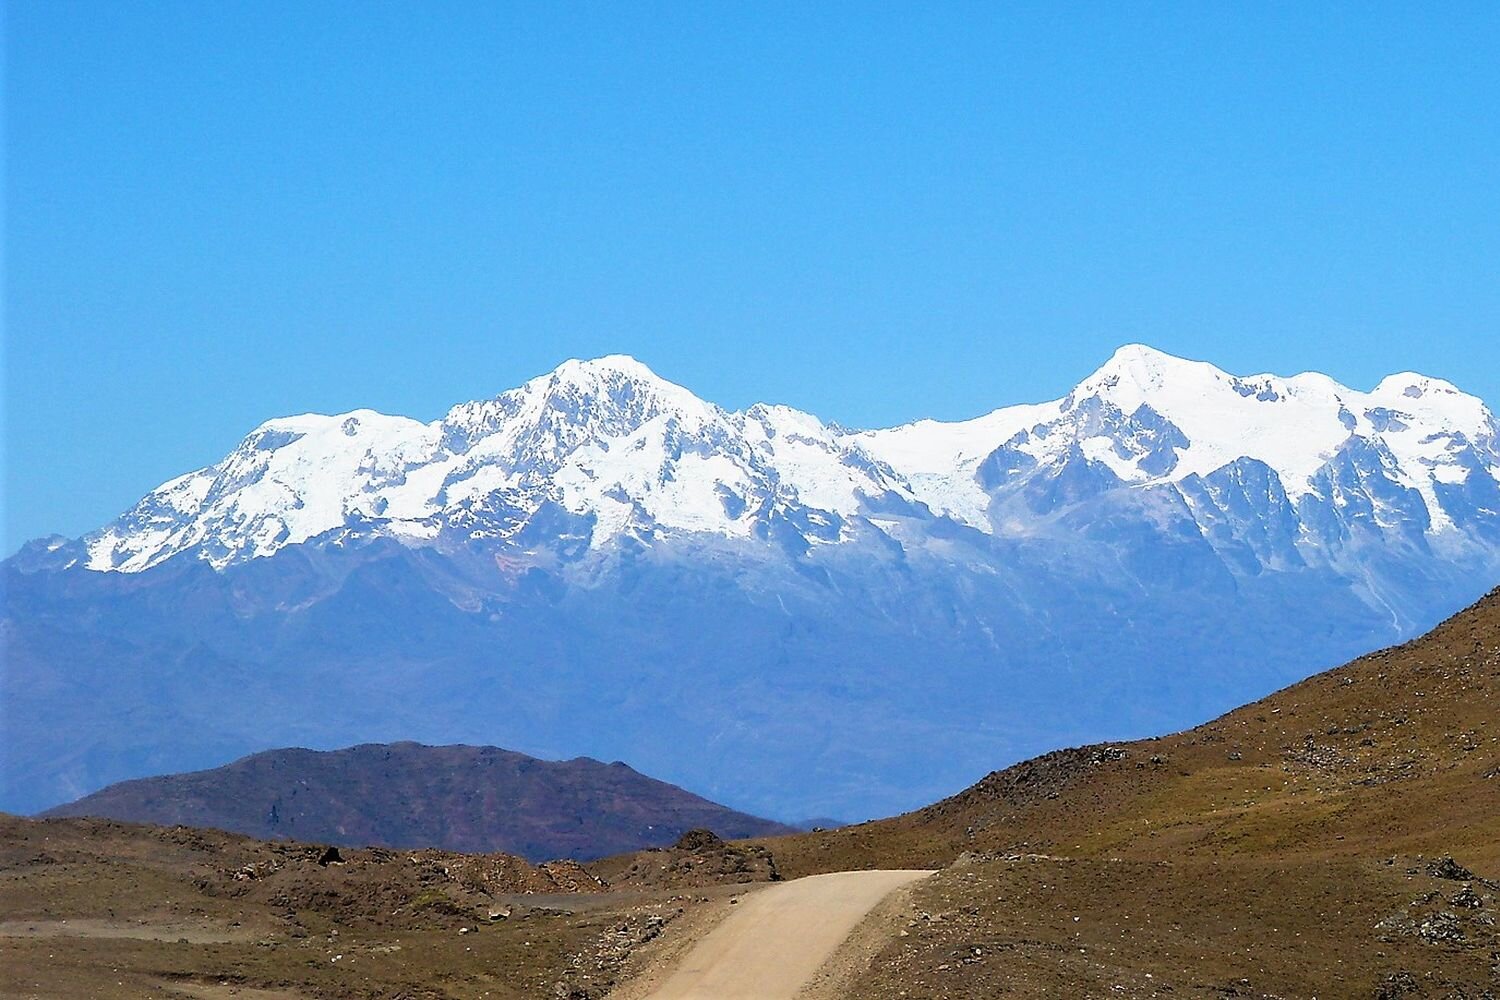  Dirt road in the nearest of Copacabana, with a view of Cordillera Real in the background. 